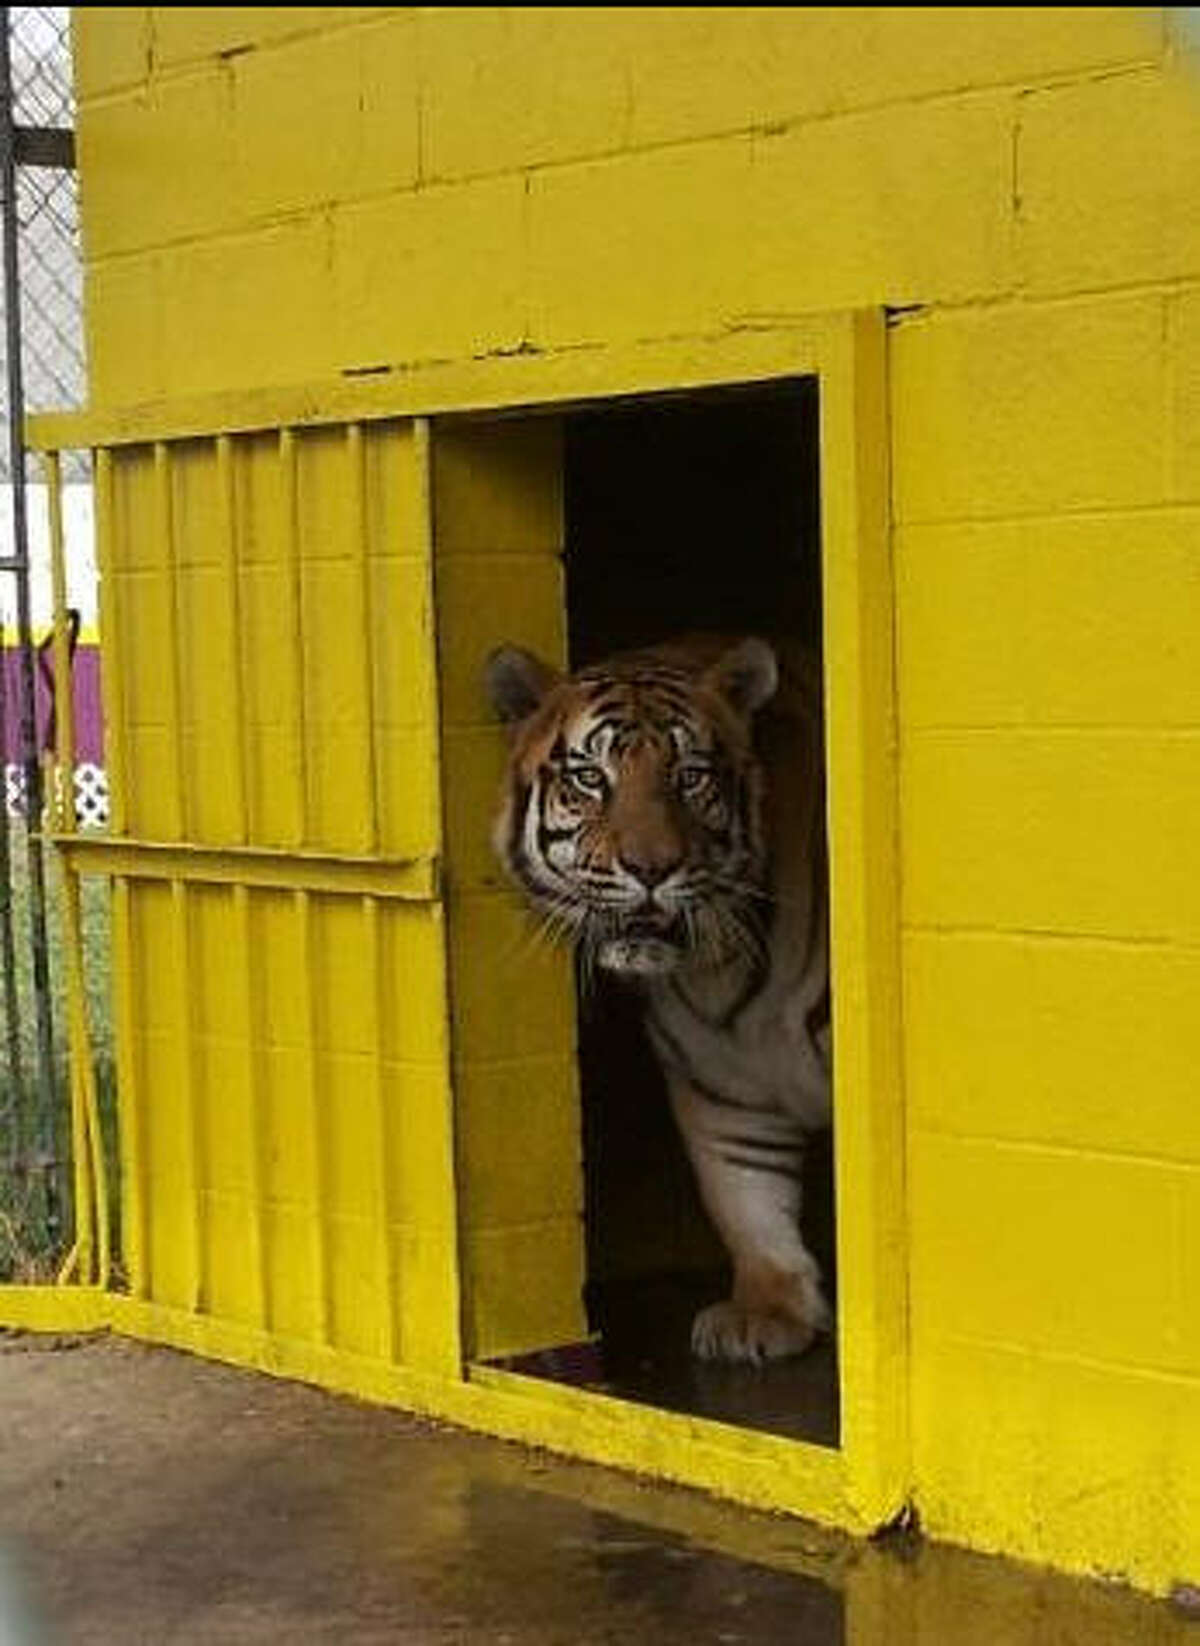 Tony, a Bengal tiger living at a truck stop in Grosse Tete, La., peers out of his cage.